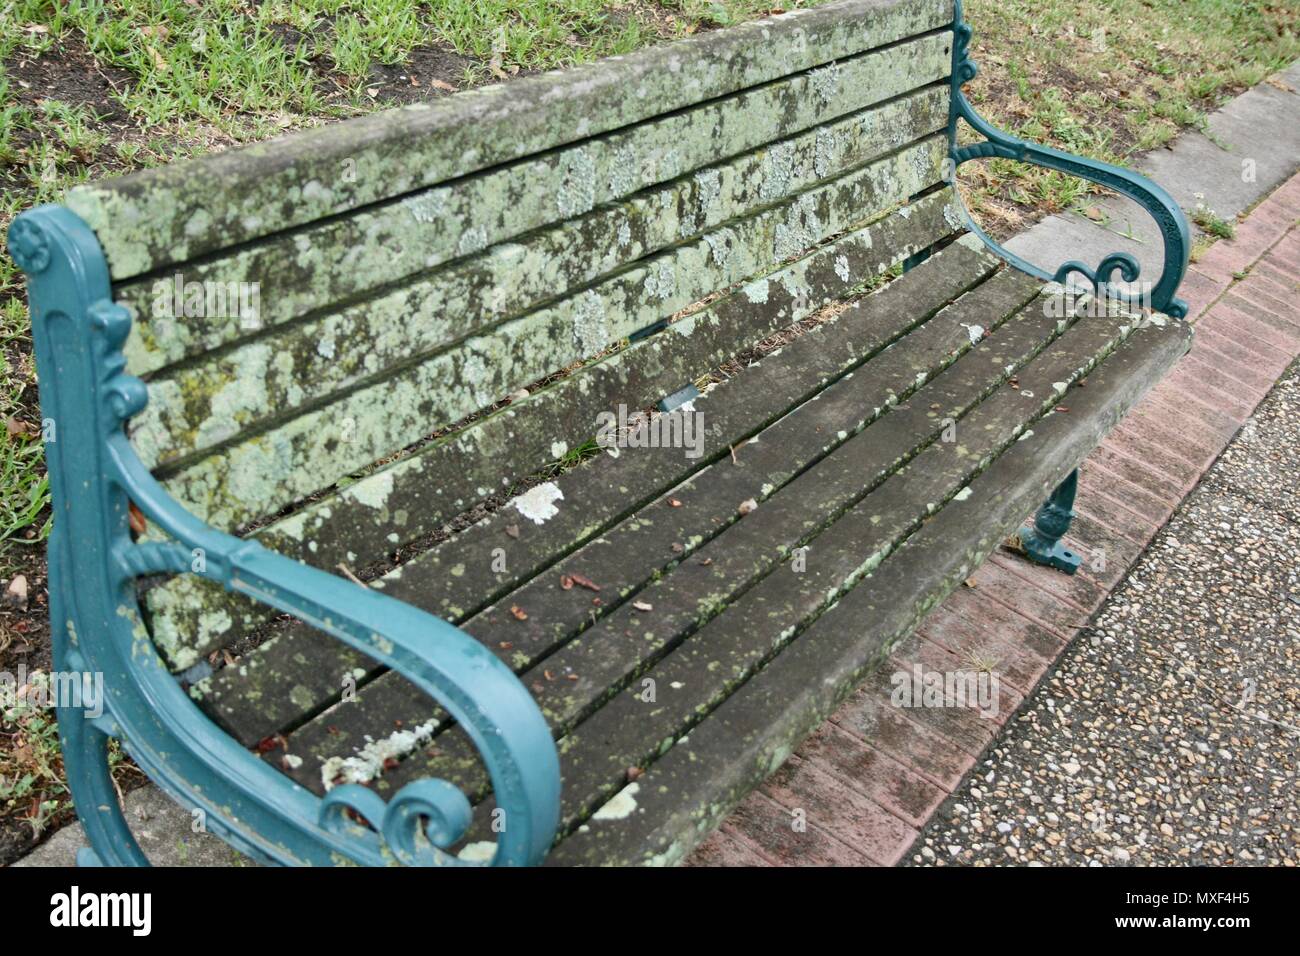 A bench filled with mold after a wet winter Stock Photo